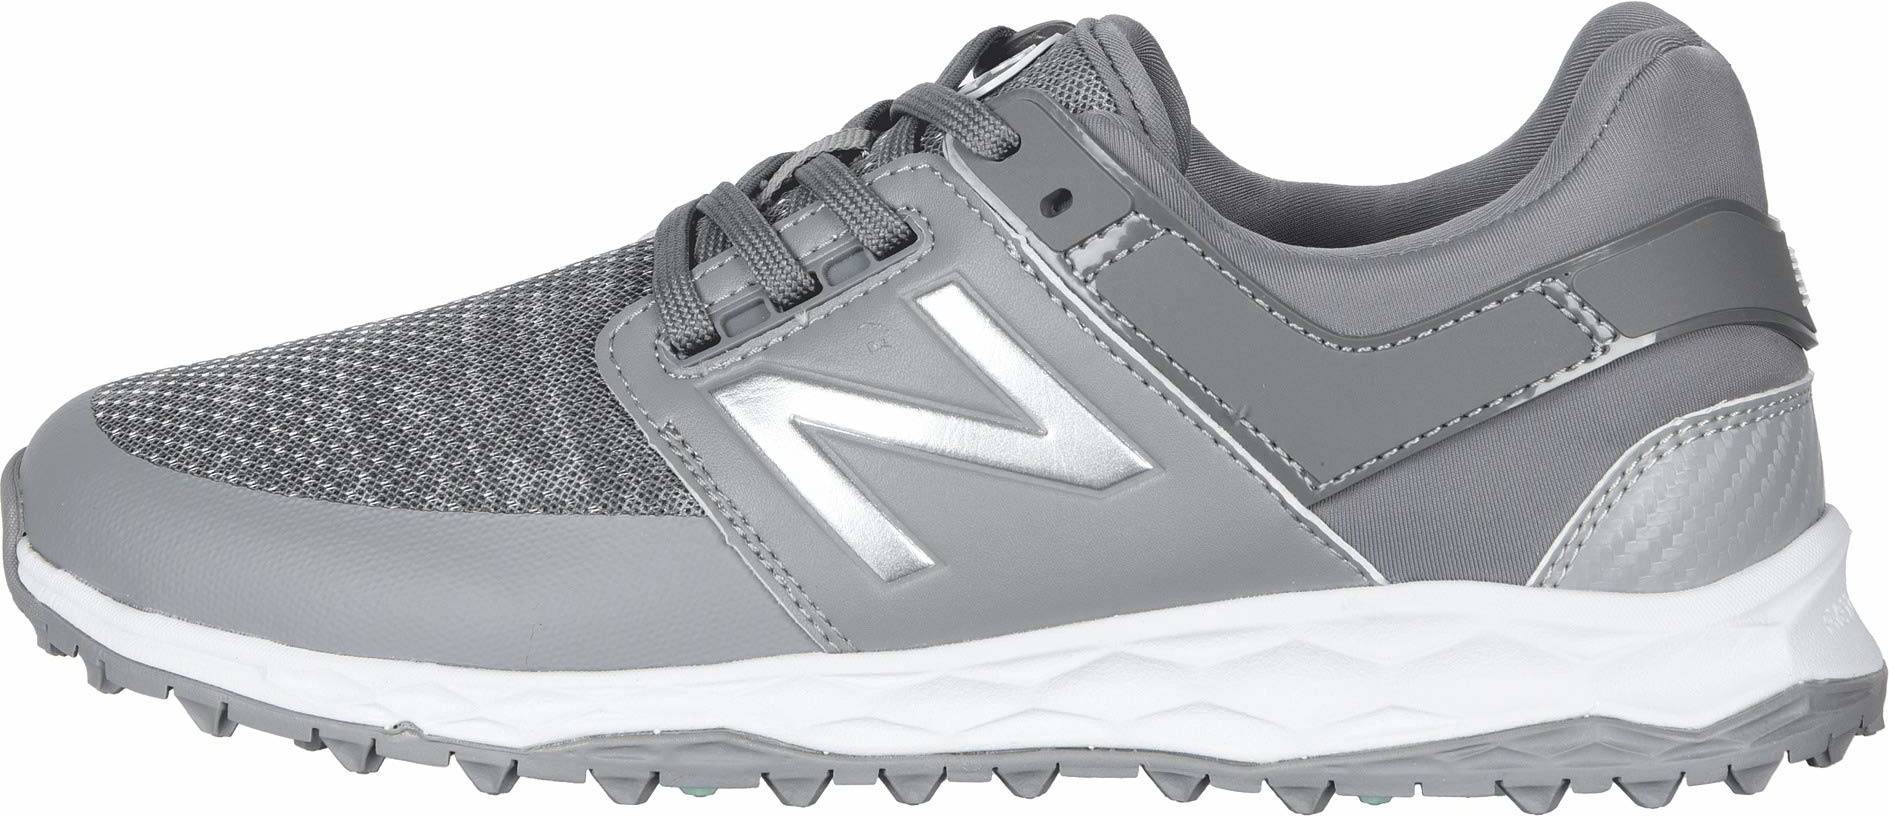 new balance golf shoes for women